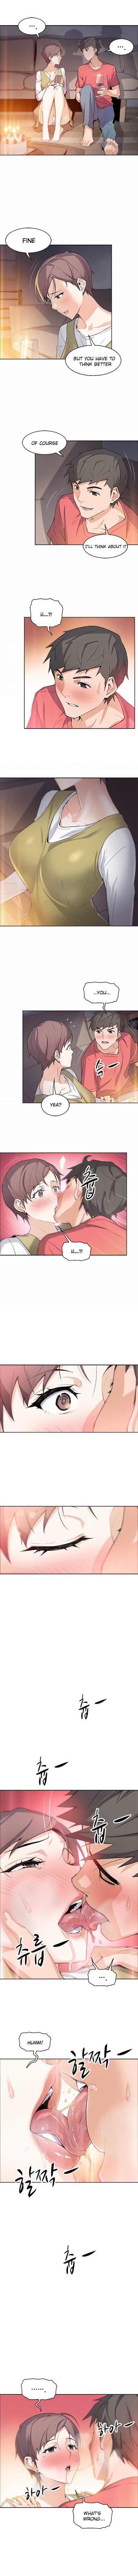 Female Orgasm Housekeeper [Neck Pillow, Paper] Ch.49/49 [English] [Manhwa PDF] Completed Anal Gape - Page 5